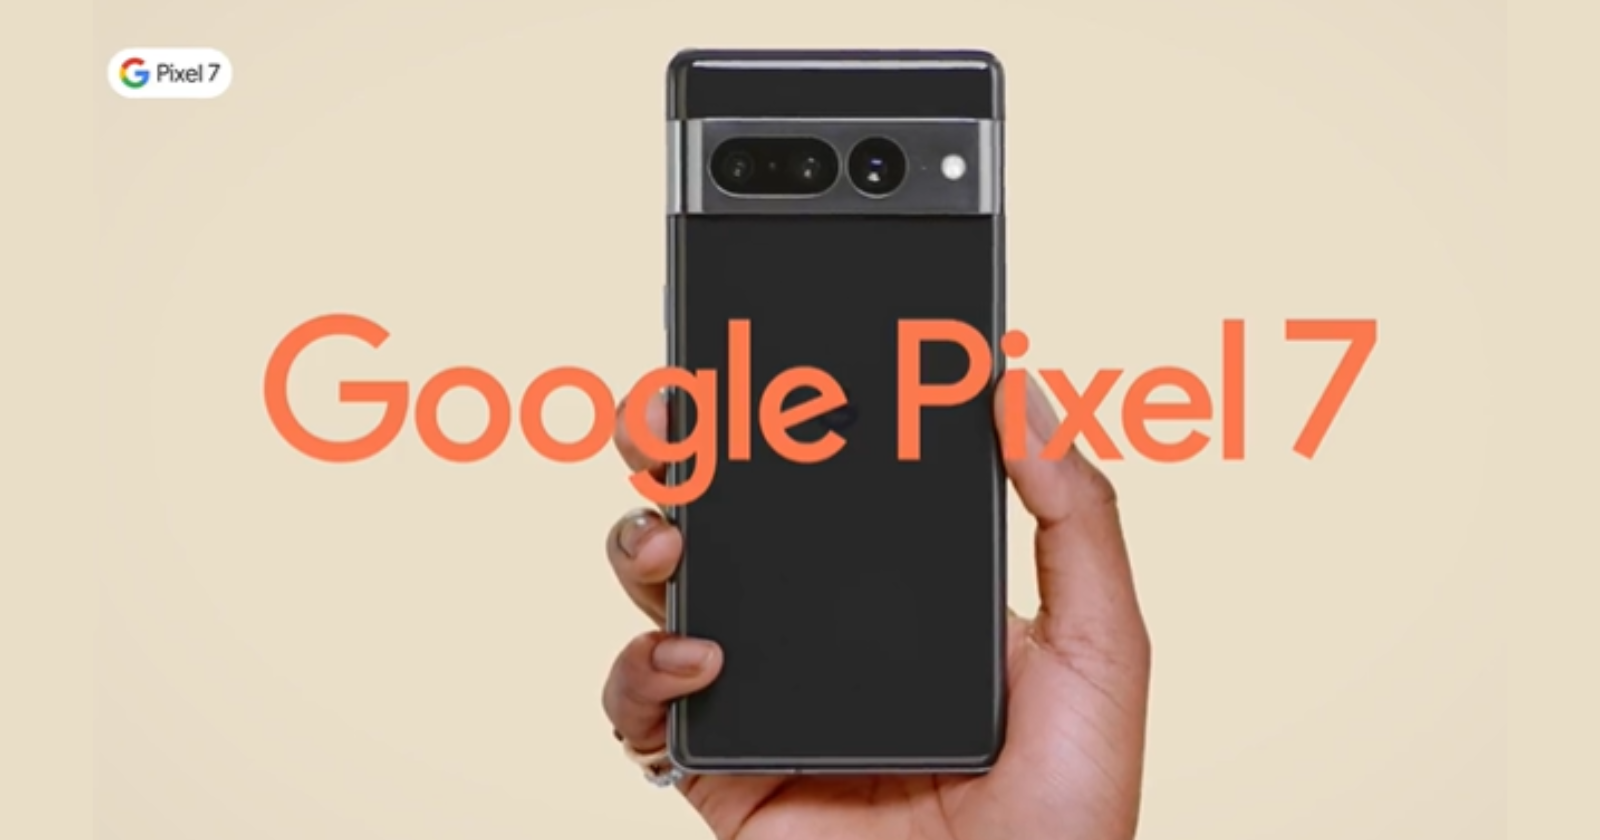 Google Pixel 7 price drops by up to $244 for a limited time and here is where you can get it